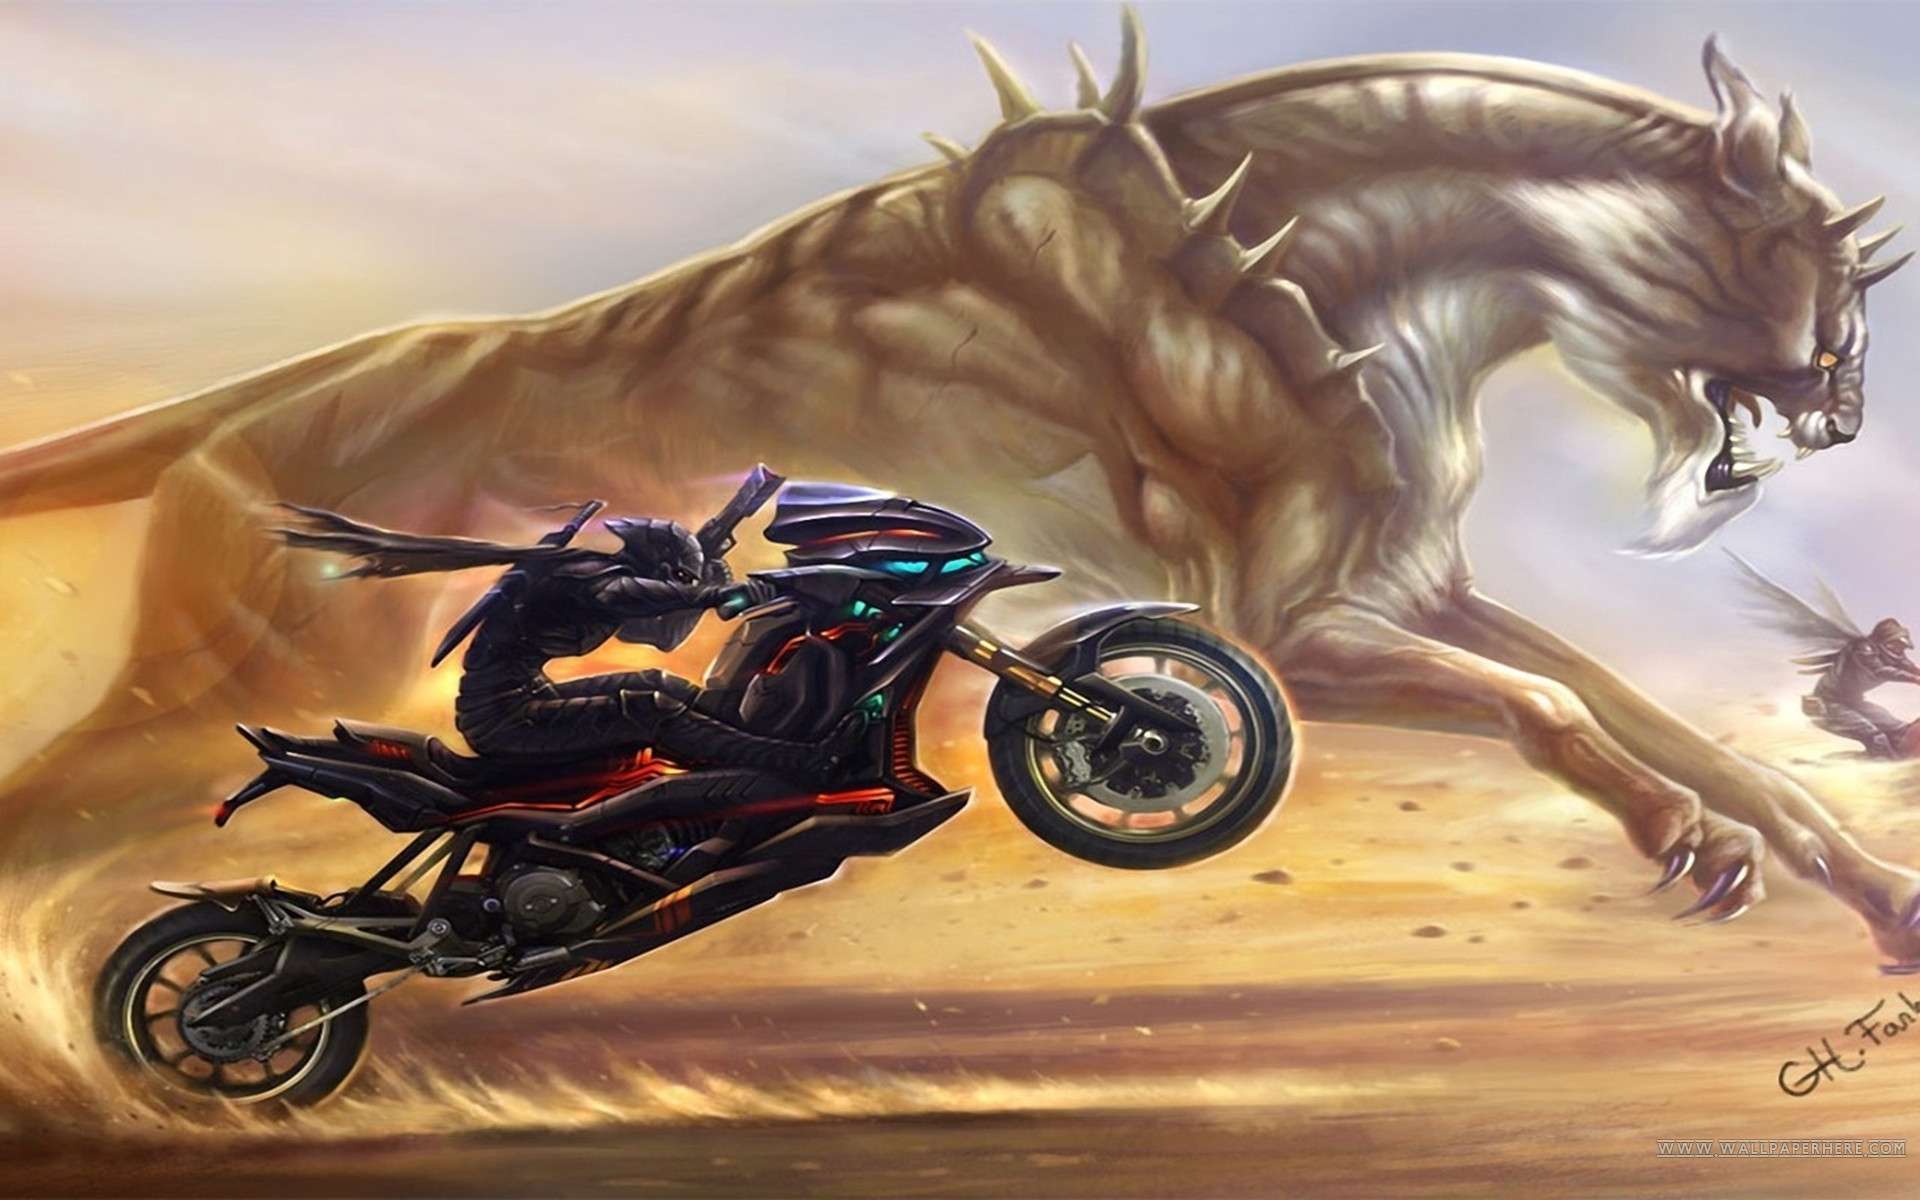 3d wallpaper of cars and bikes,vehicle,fictional character,illustration,mythology,chariot